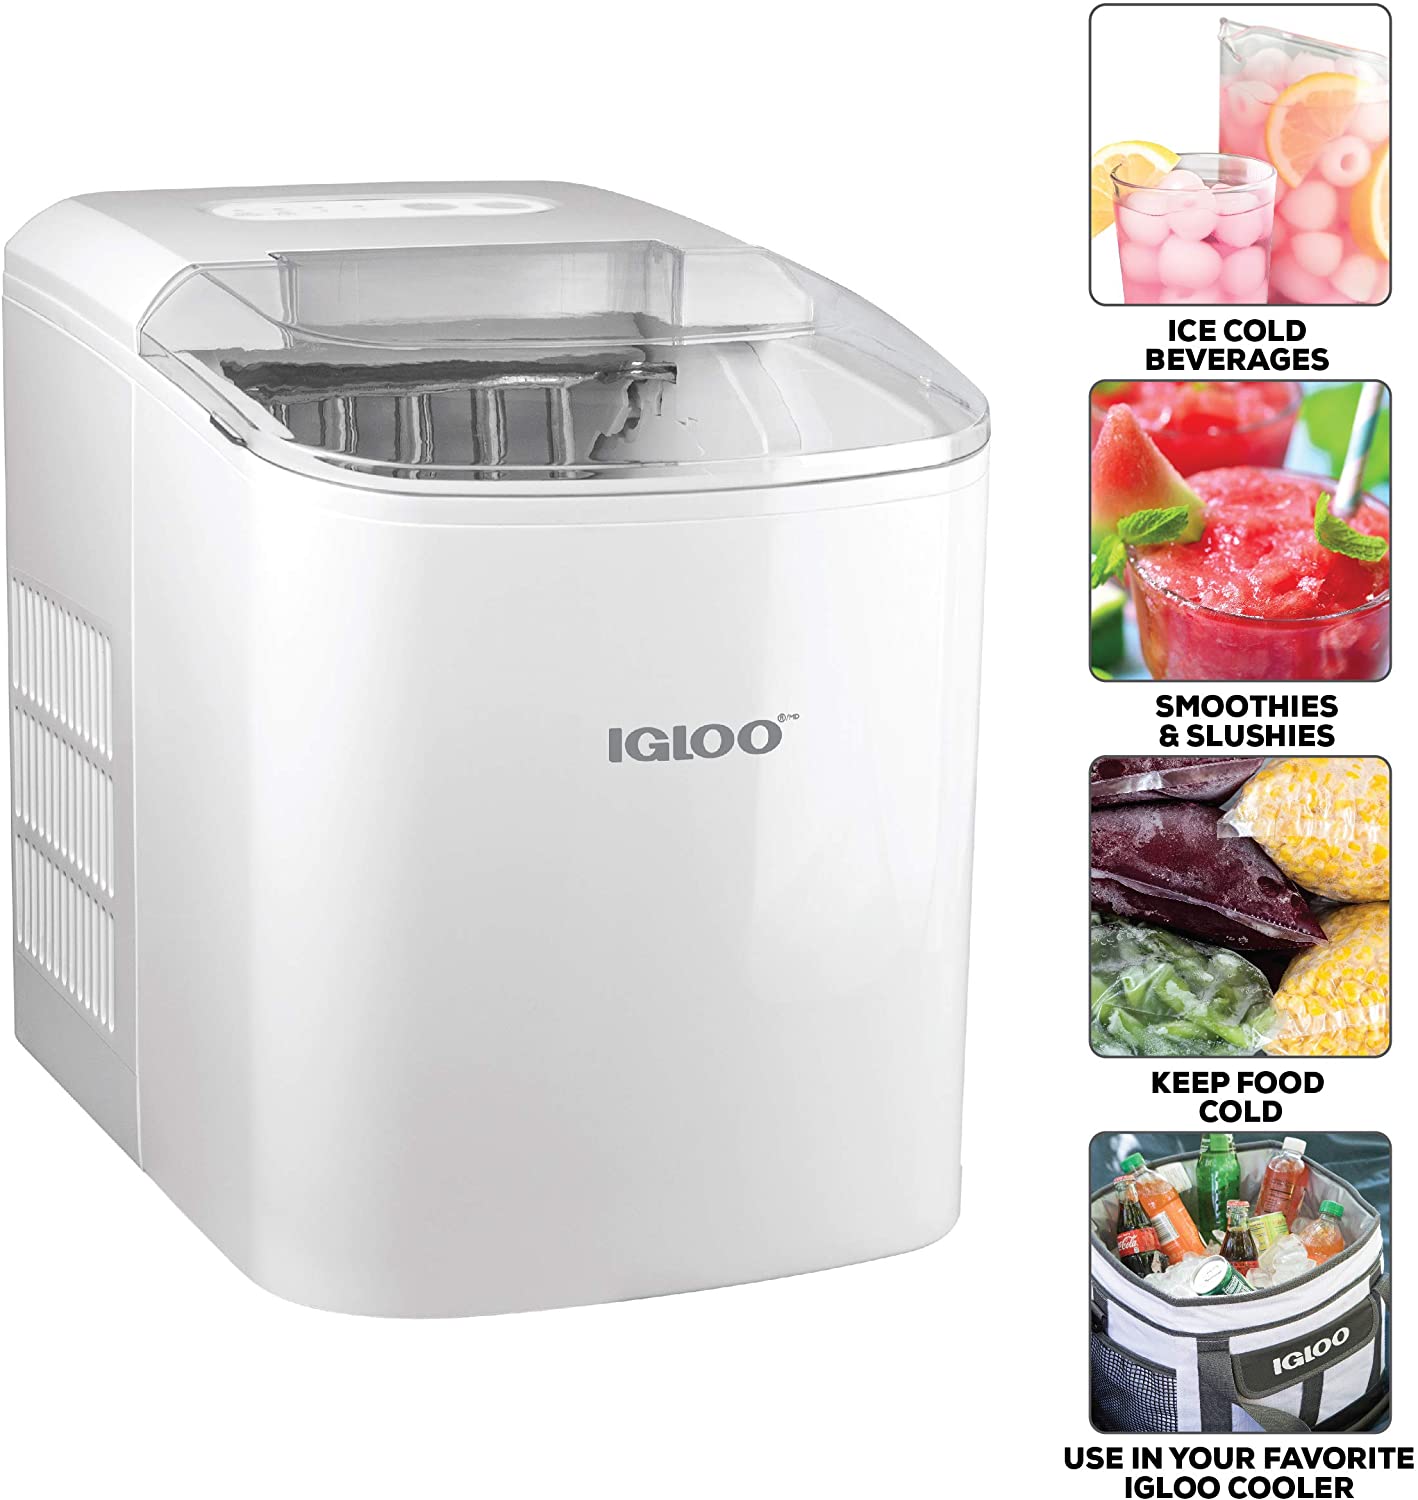 Igloo ICEB26WH Automatic Portable Electric Countertop Ice Maker Machine